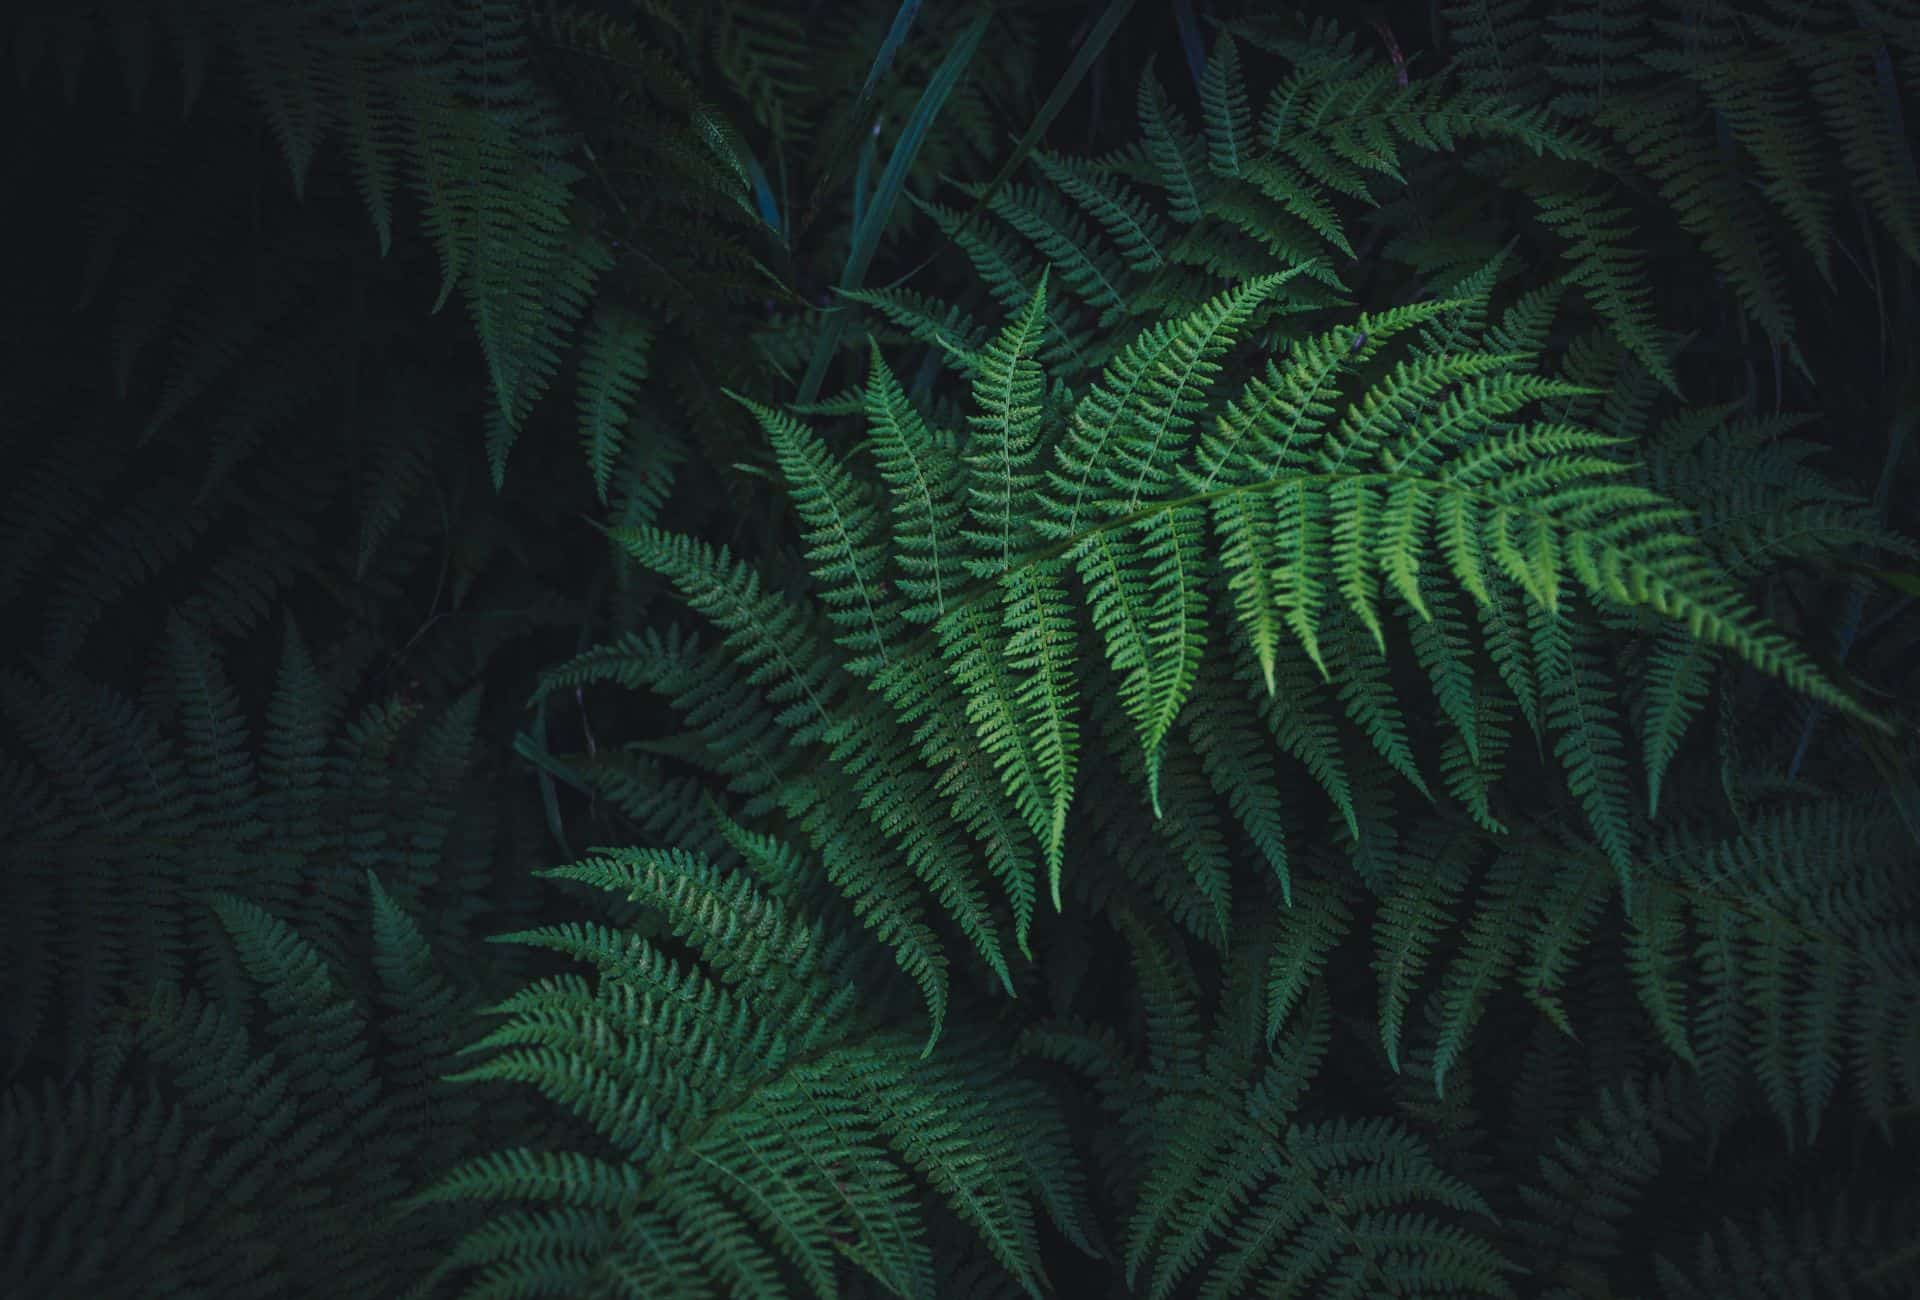 Green, lushes ferns in a forest.